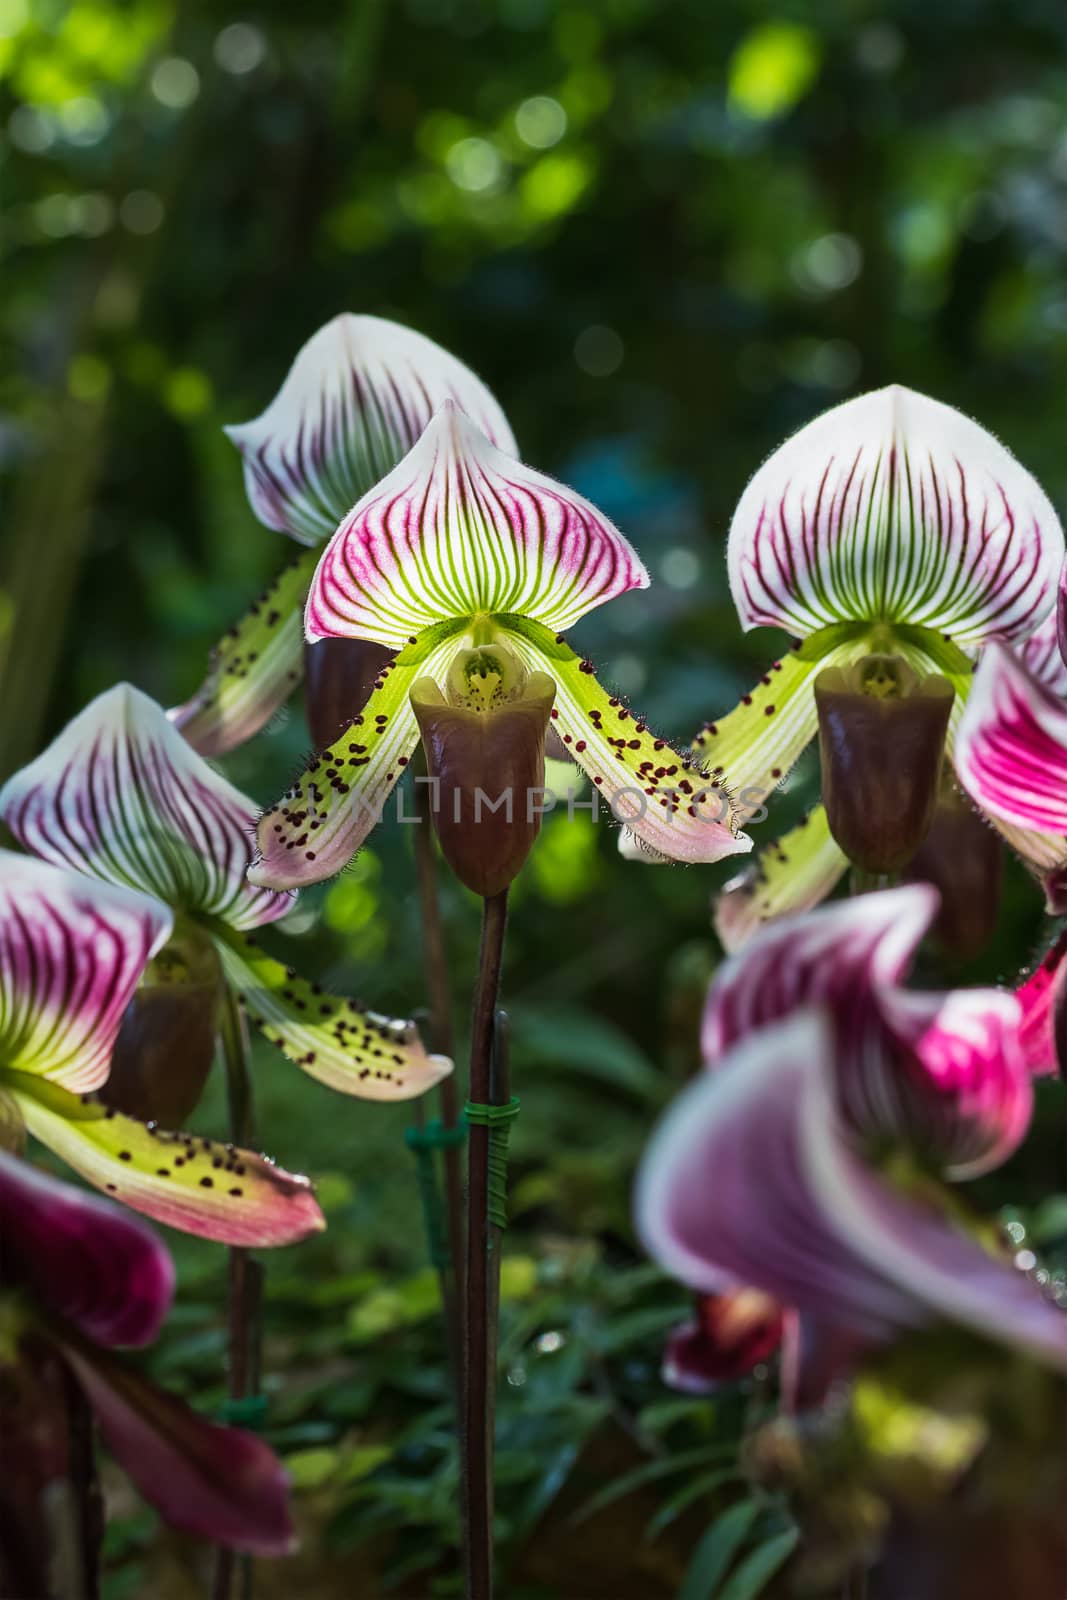 Paphiopedilum of Orchid flower by stoonn